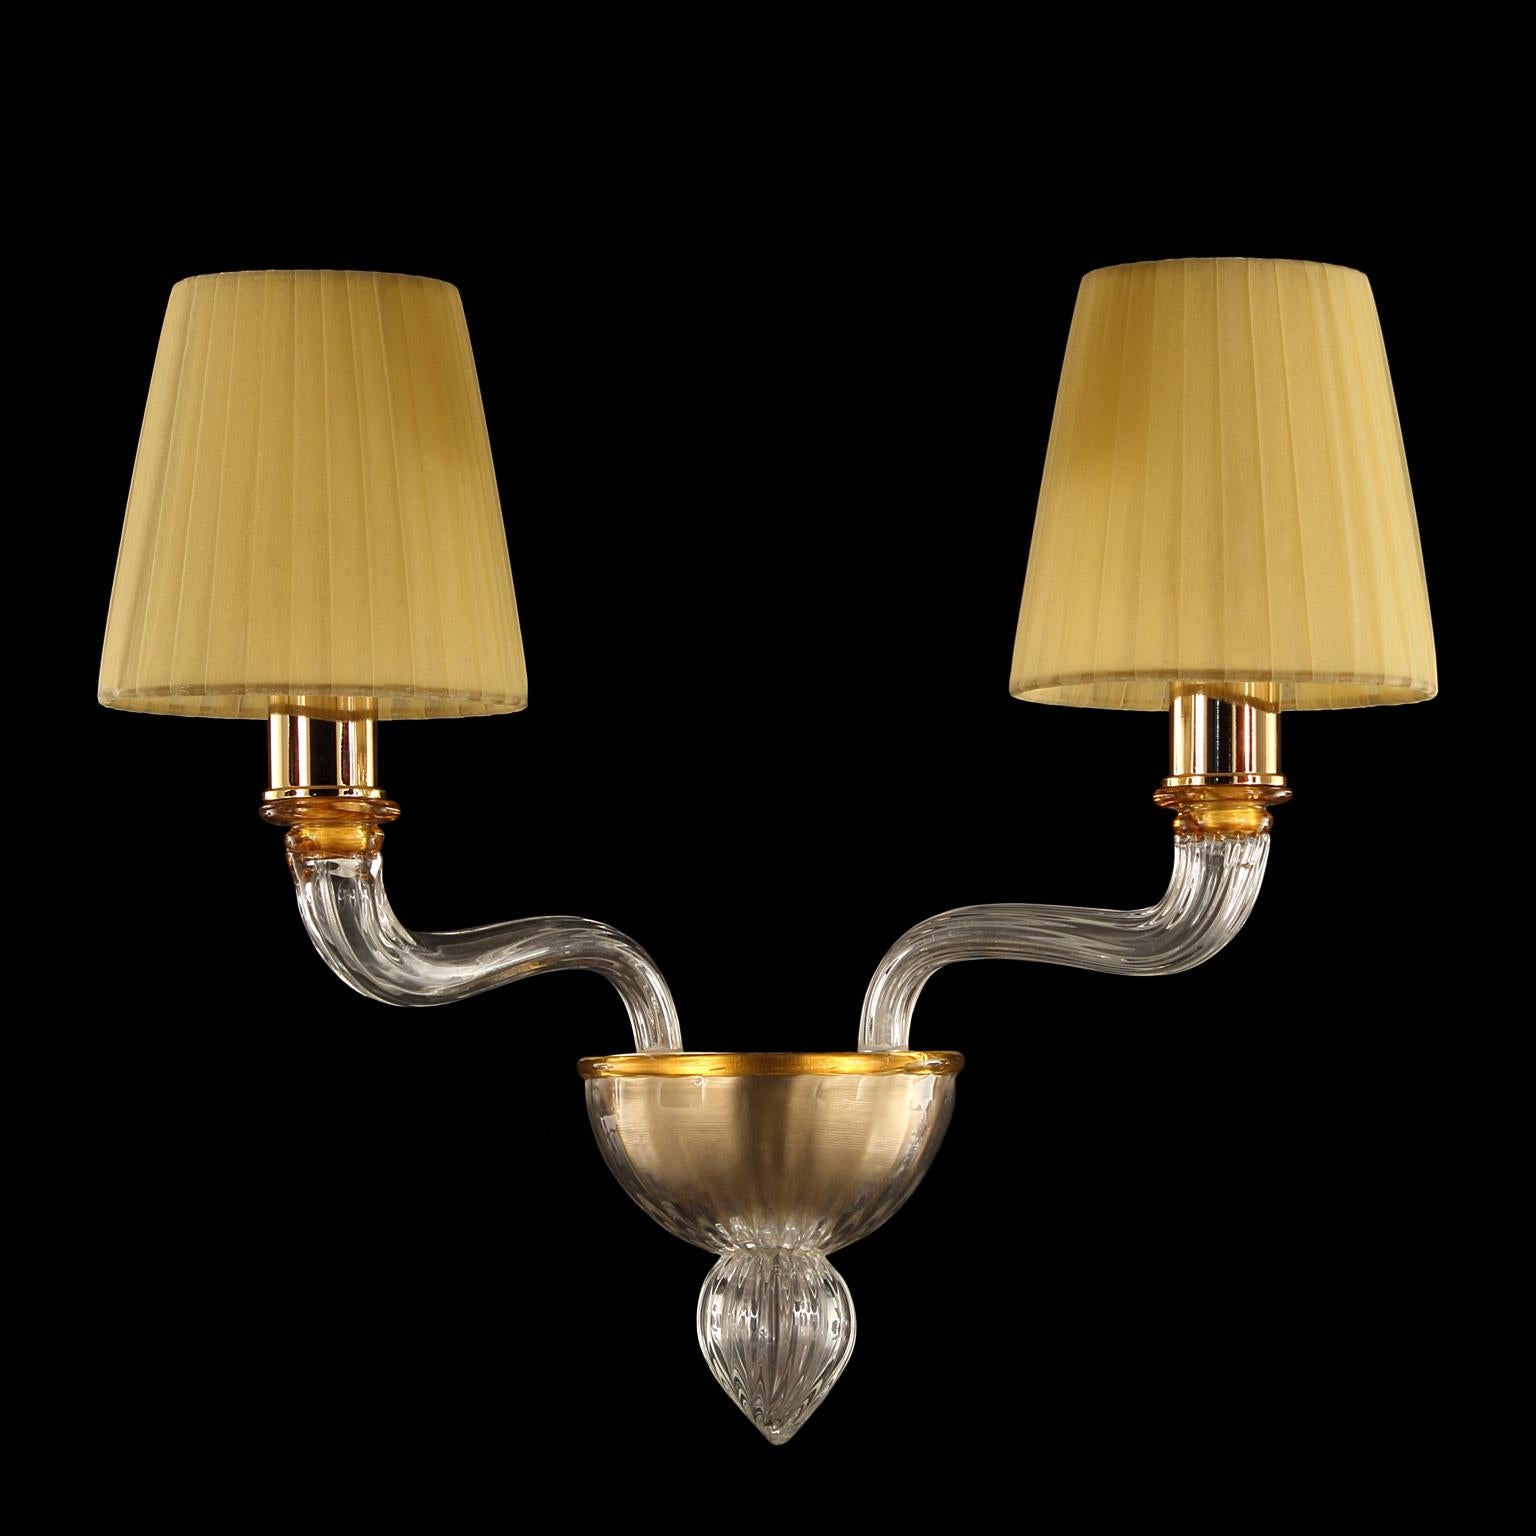 Coco sconce with 2 arms in clear and amber Murano glass with amber colour handmade lampshades by Multiforme.
The Murano glass Coco collection takes inspiration from Coco Chanel, the revolutionary woman that has changed the fashion industry during